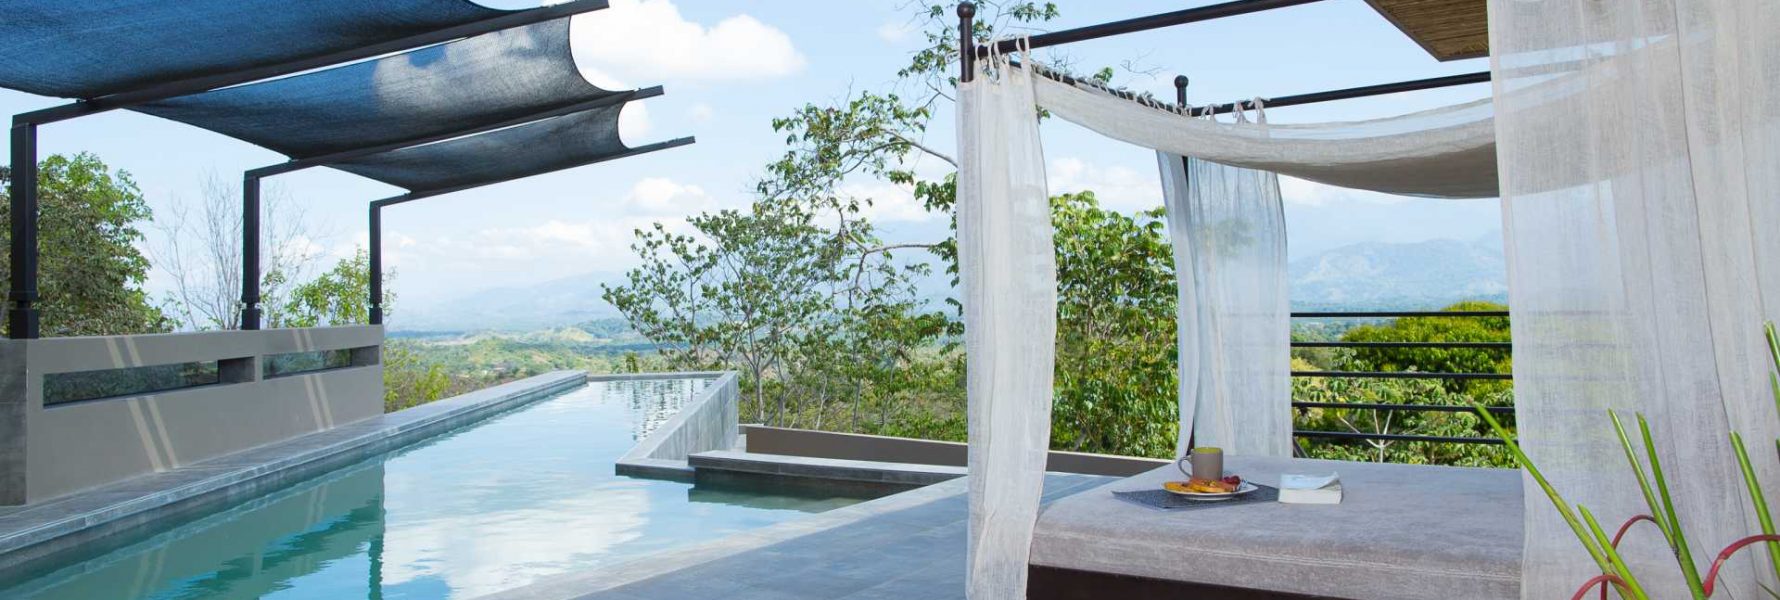 Enjoy using this beautiful infinity pool looking out over the Rain forested area of Manuel Antonio. 